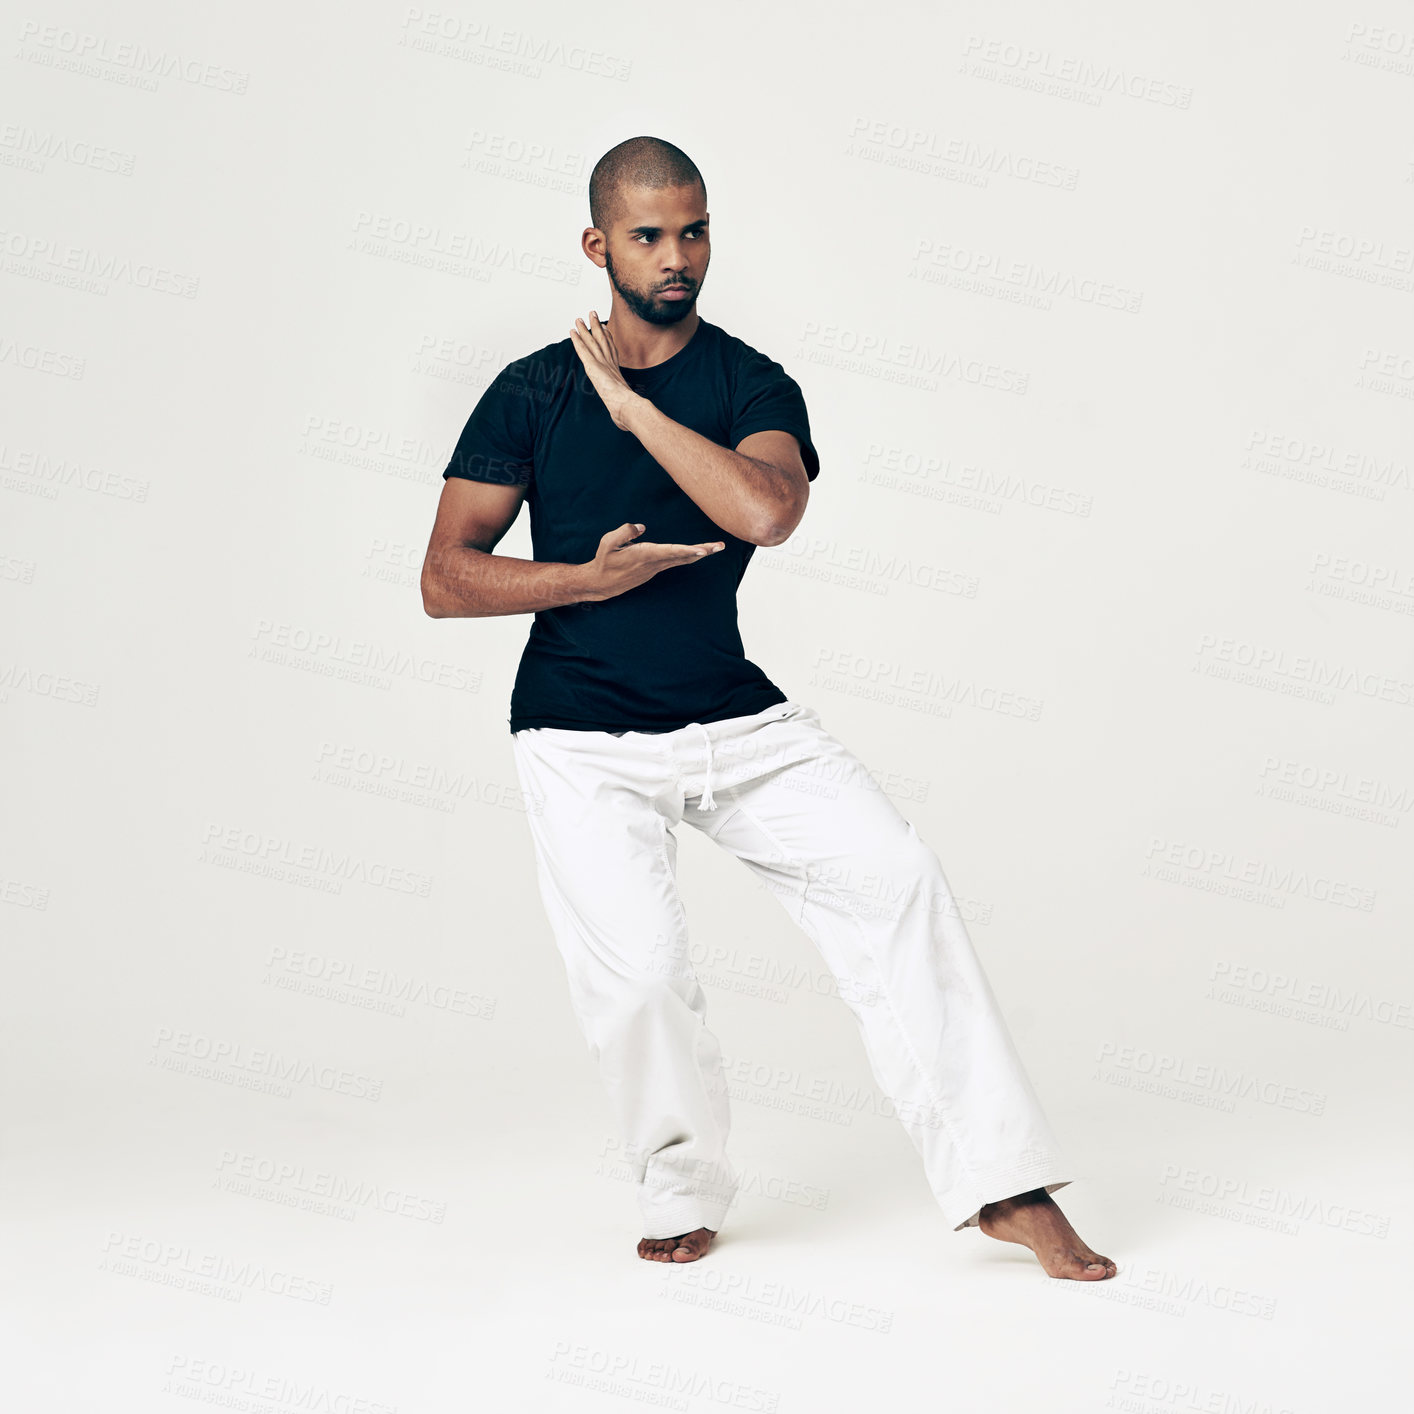 Buy stock photo Tai chi, training and man in martial arts exercise or calm movement with hands on white background. Balance, workout and person with skill in self defence technique or healthy practice of action